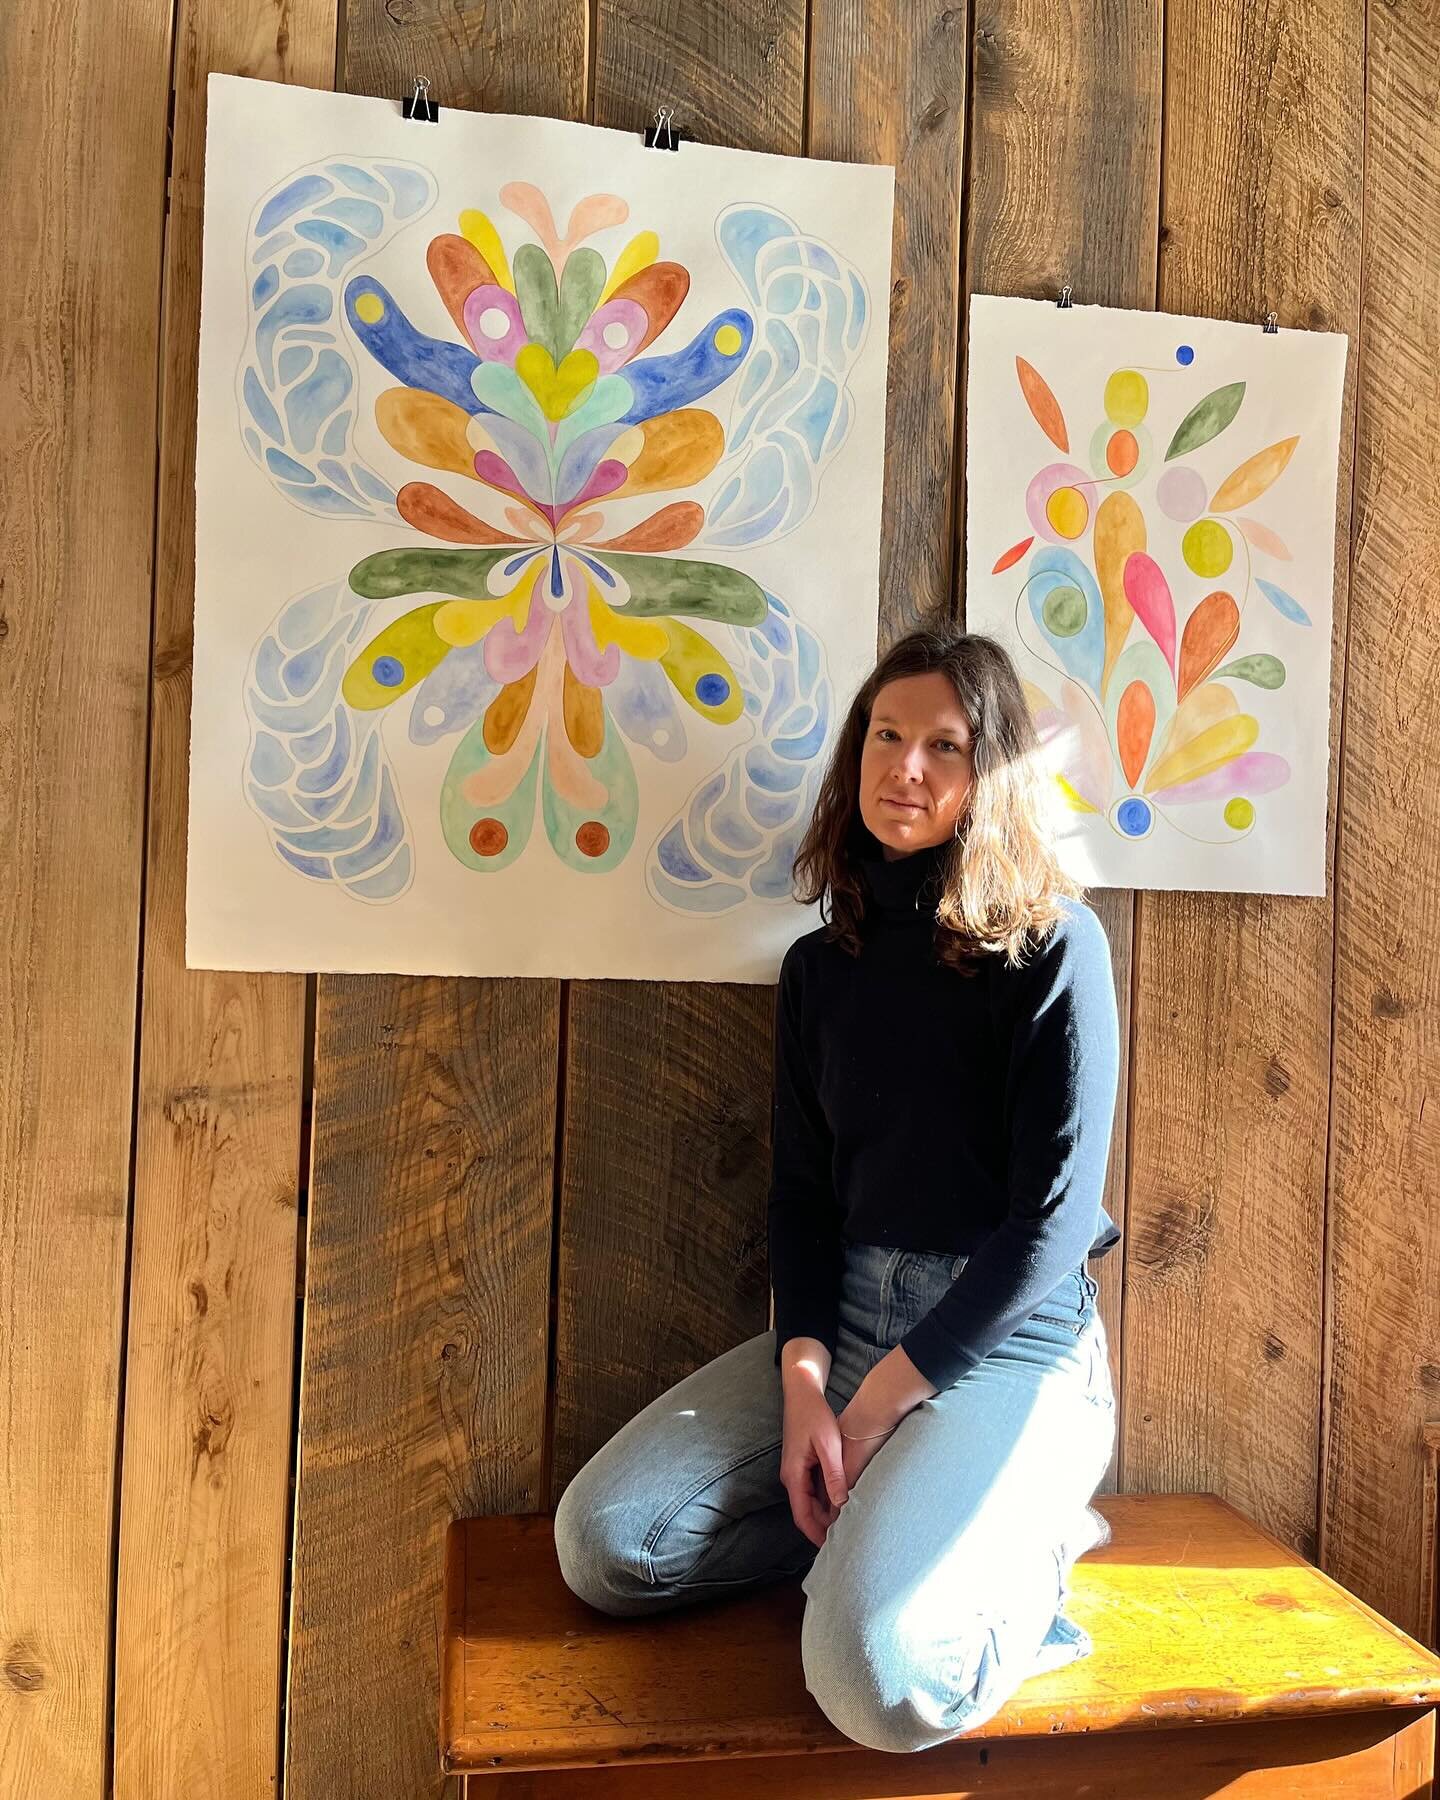 @julialbollinger lives and practices in the magical Blue Ridge mountains of Virginia, and her work partakes in that magic&mdash;though not as you might expect. Watercolour and crayon works&mdash;drawn intuitively through an automatic drawing process&